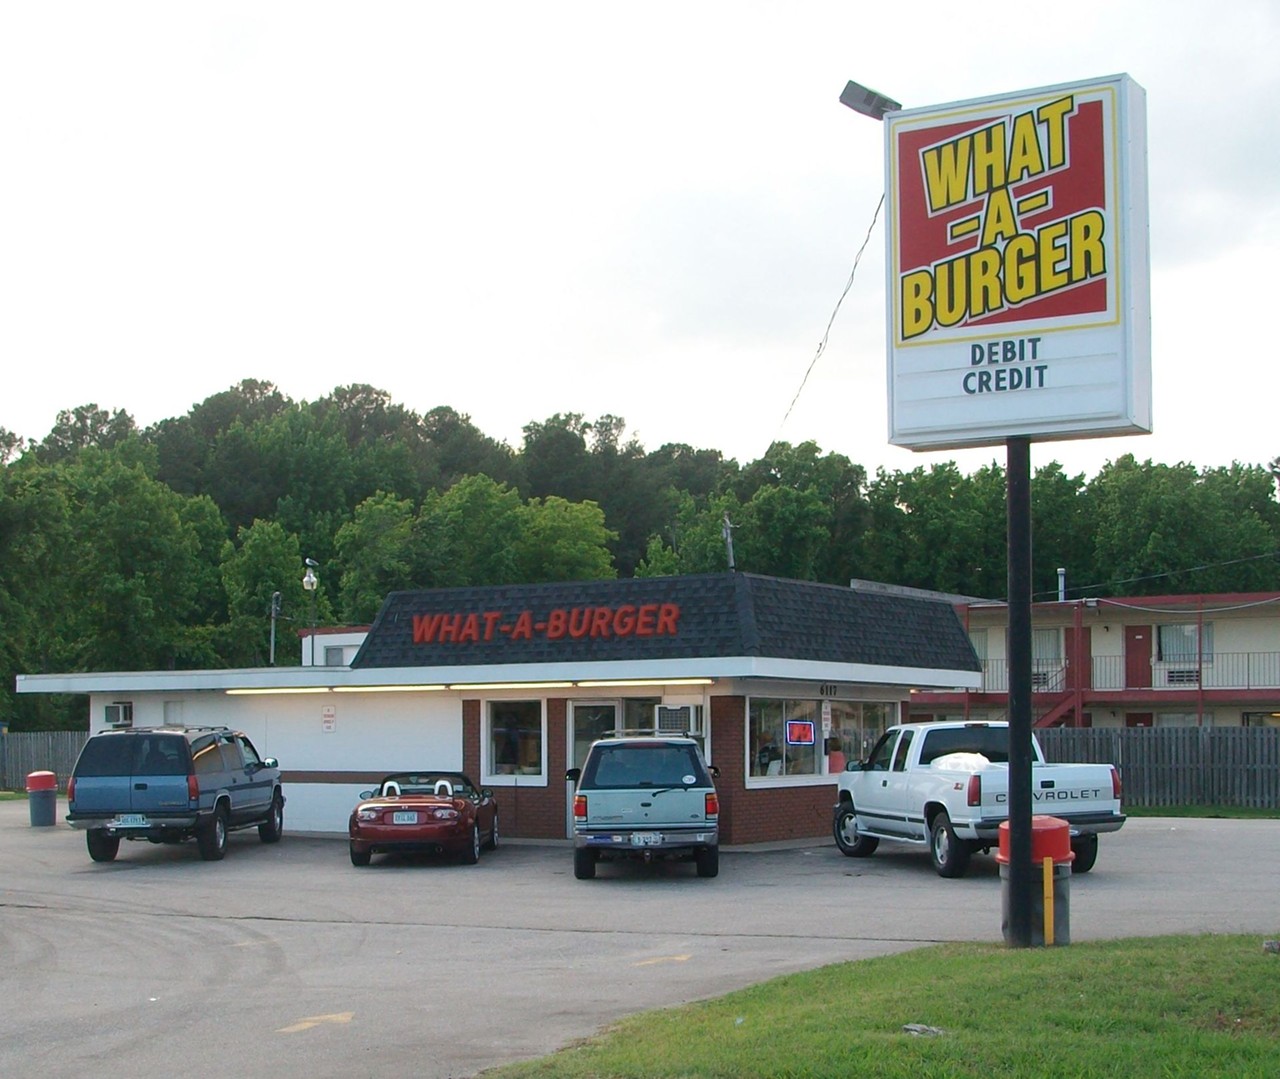 Whataburger or What-A-Burger?
Residents of Virginia and the Carolinas enjoy a chain of burger joints called What-A-Burger, which nearly ended up in a merger with the Texas icon. The two entities eventually settled for a co-existence agreement, and they’ve been happily serving burgers in their respective states since.
Photo via Wikimedia Commons / Vaoverland